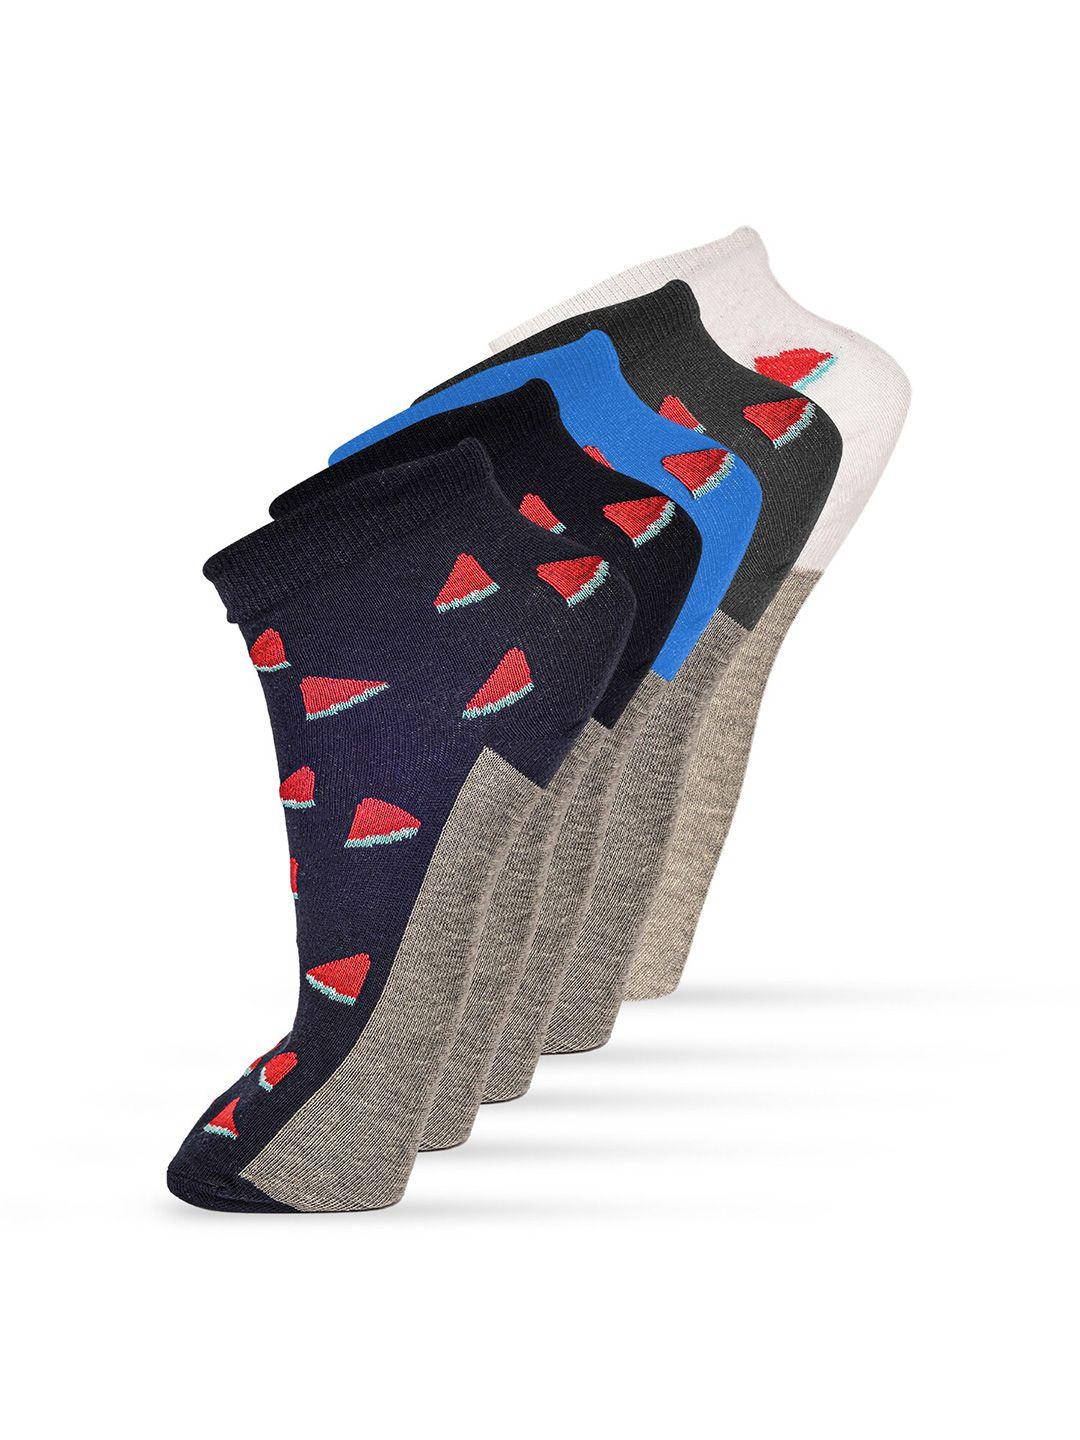 frenchie-men-pack-of-5-assorted-patterned-cotton-ankle-length-socks